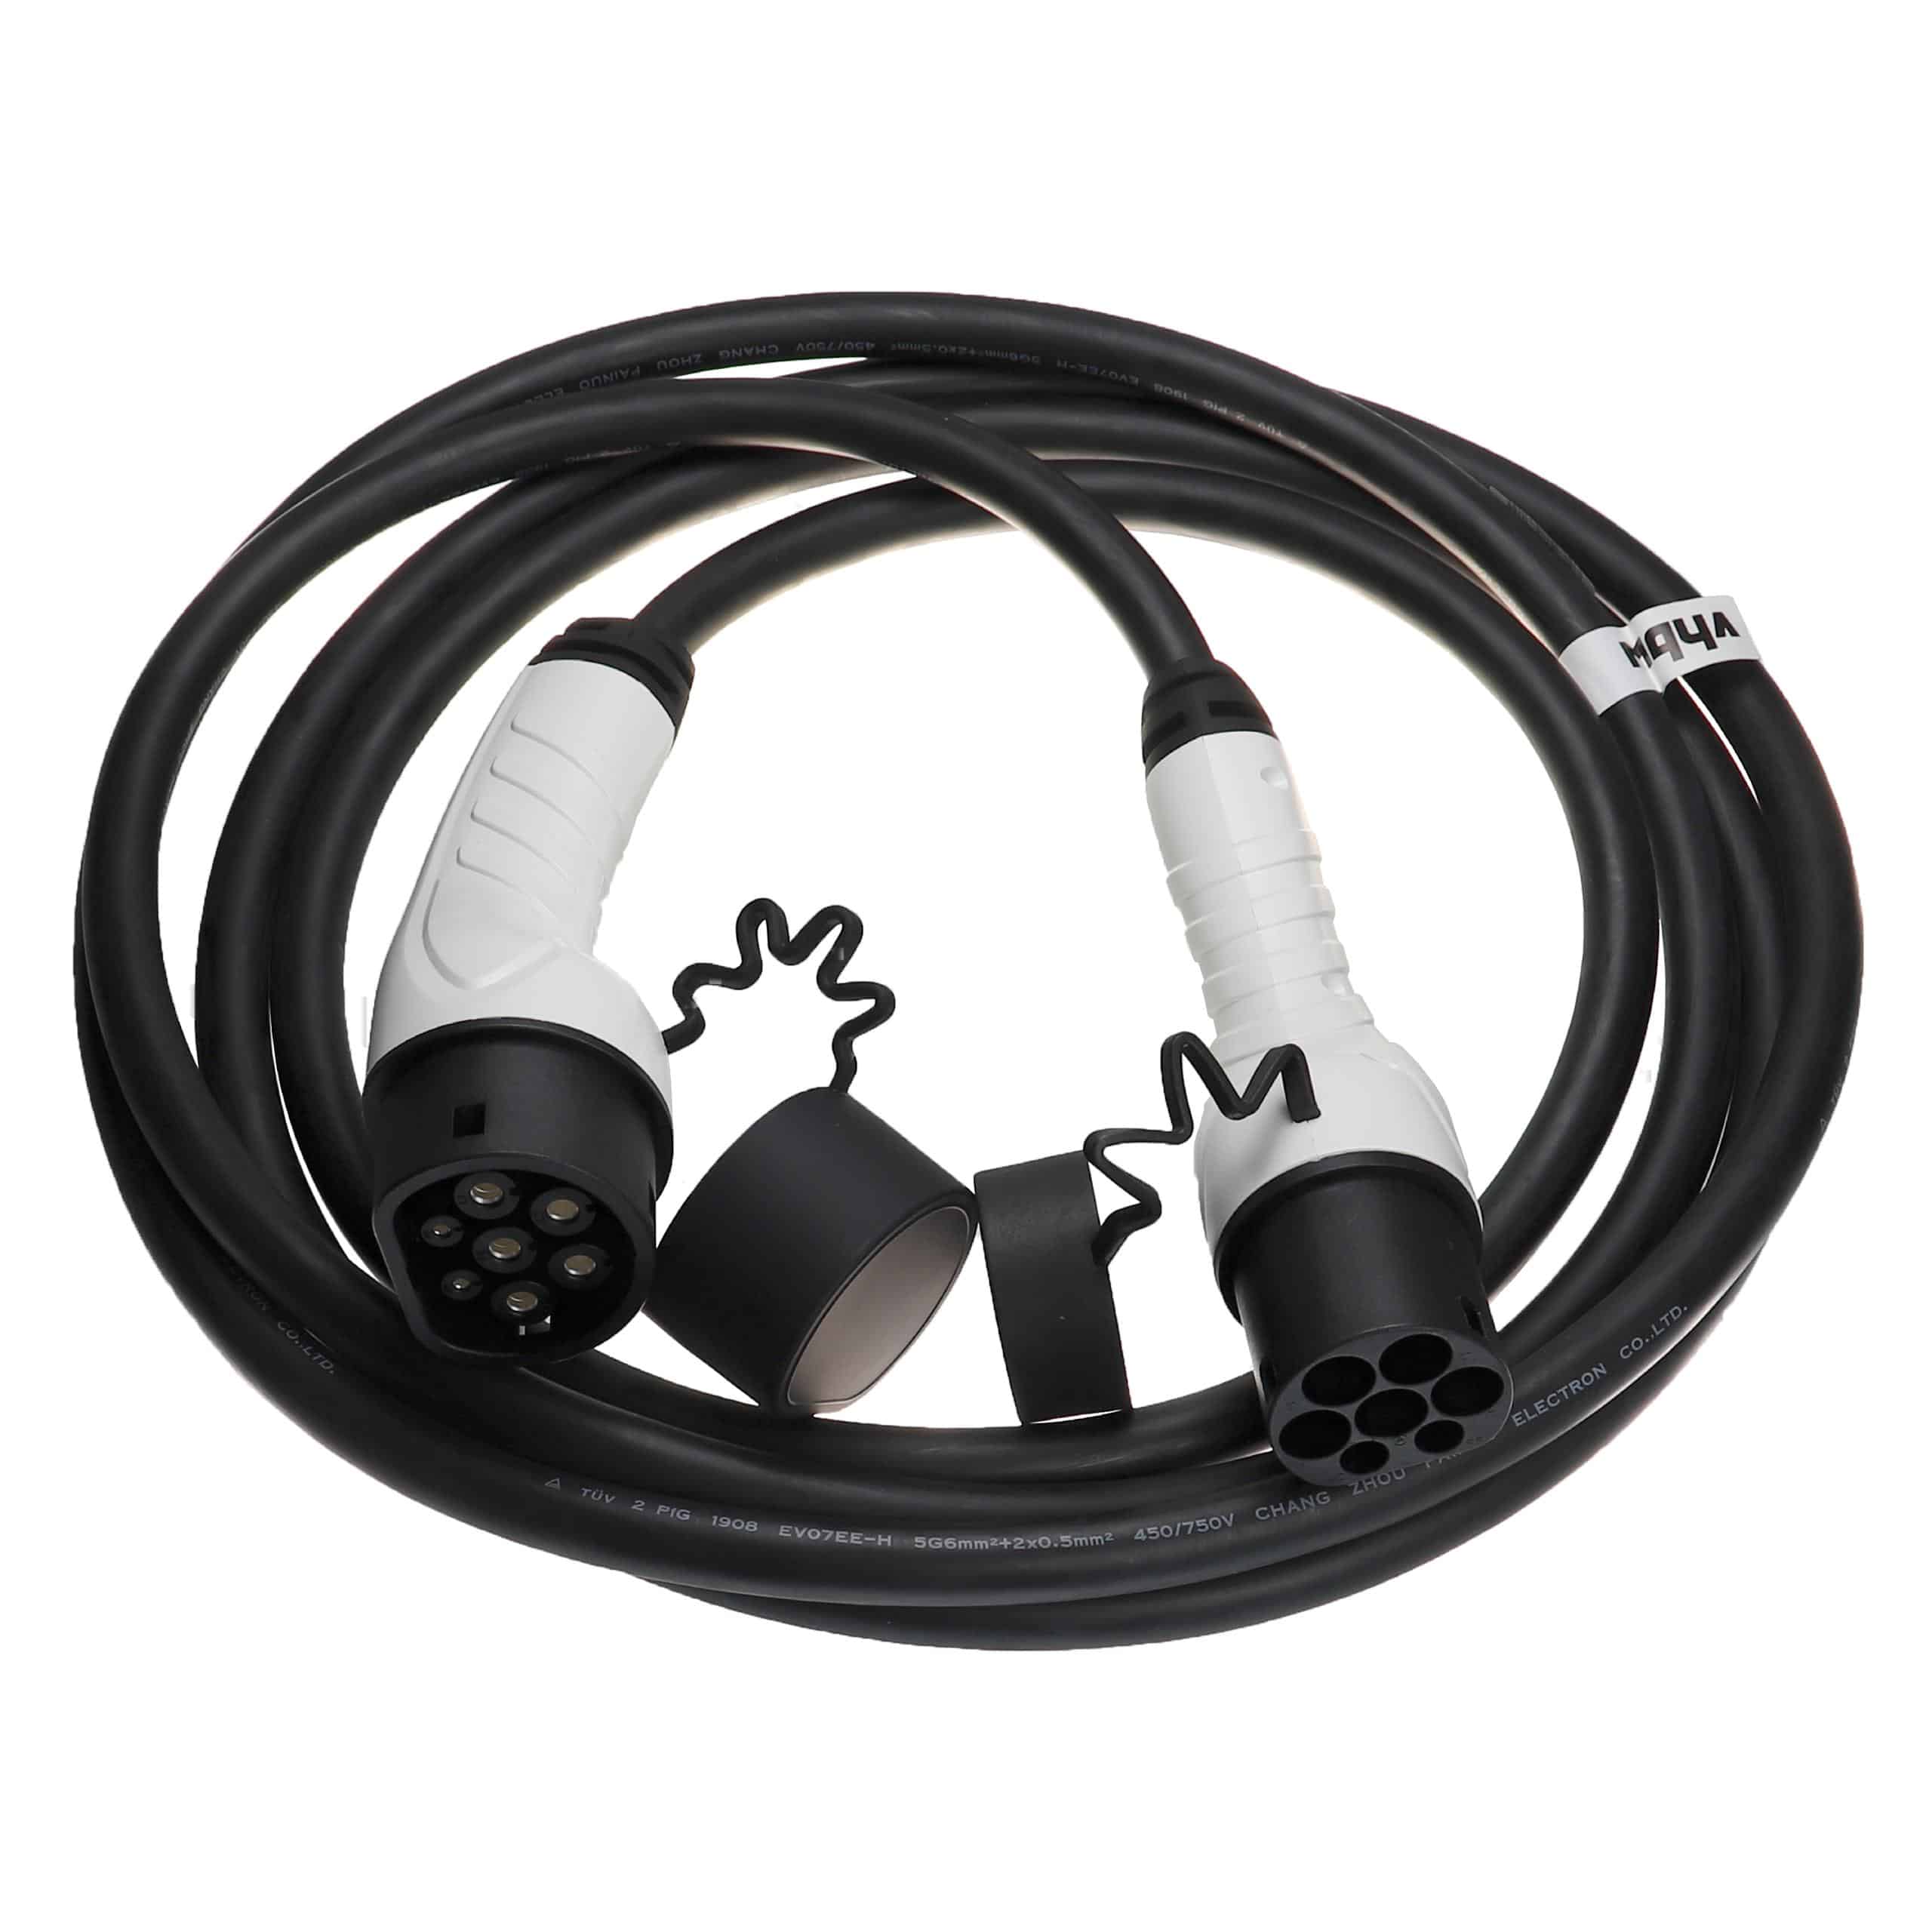 Charging Cable for Electric Car, Plug-In Hybrid - Type 2 to Type 2 Cable, 3-phase, 32 A, 22 kW, 5 m